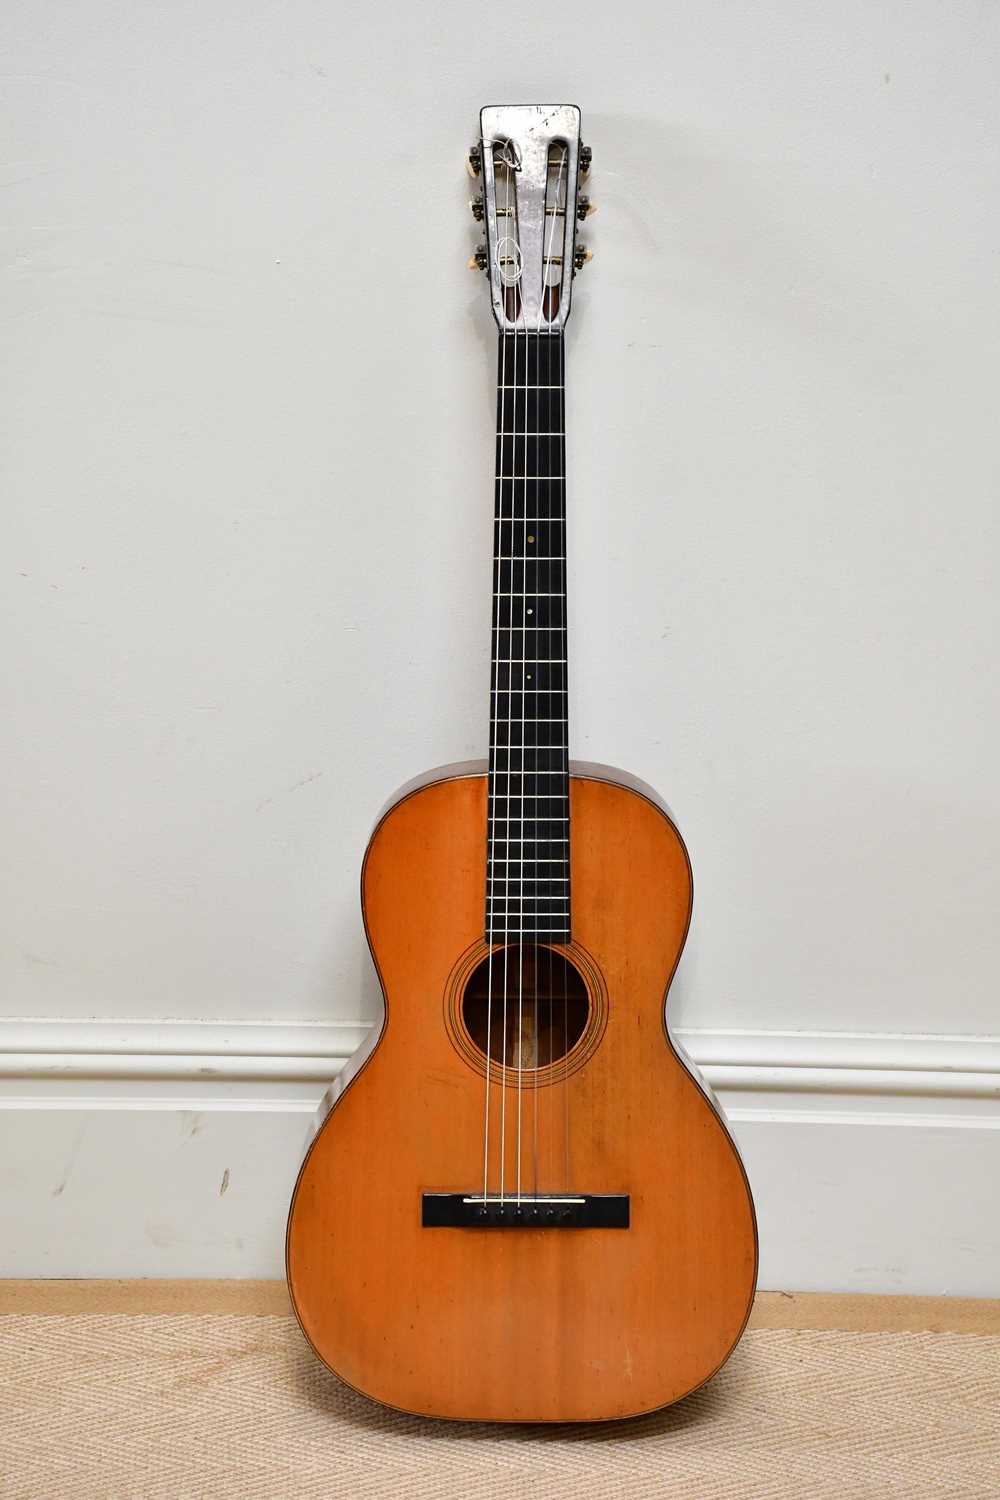 C F MARTIN; a 1927 model 0-18 acoustic guitar with mahogany neck, back and sides, serial number